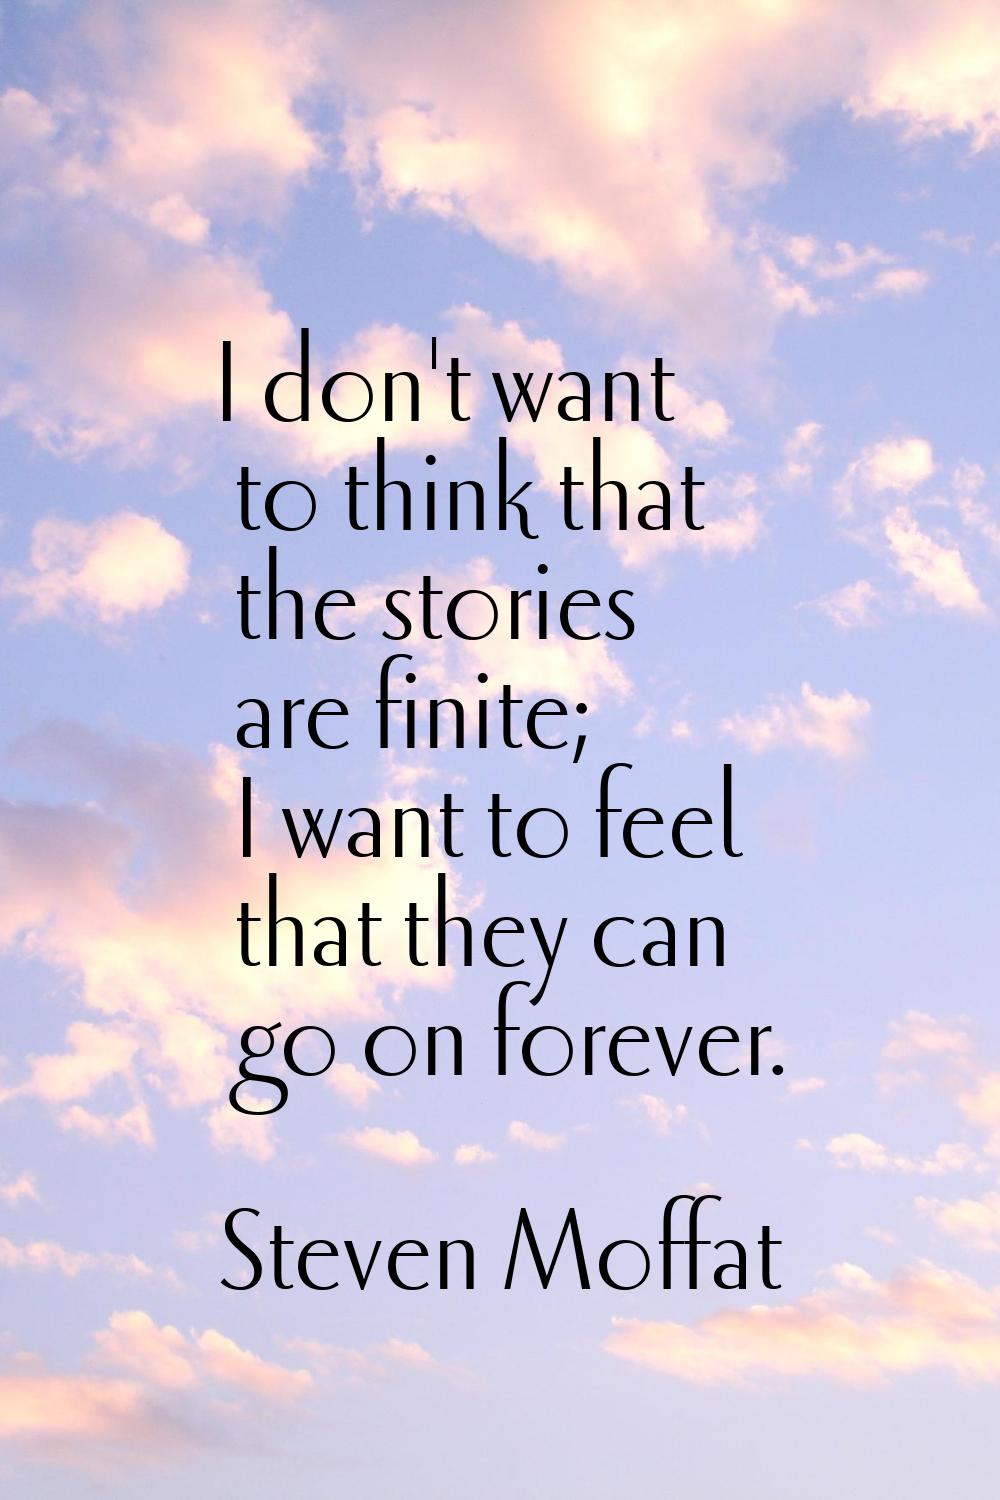 I don't want to think that the stories are finite; I want to feel that they can go on forever.